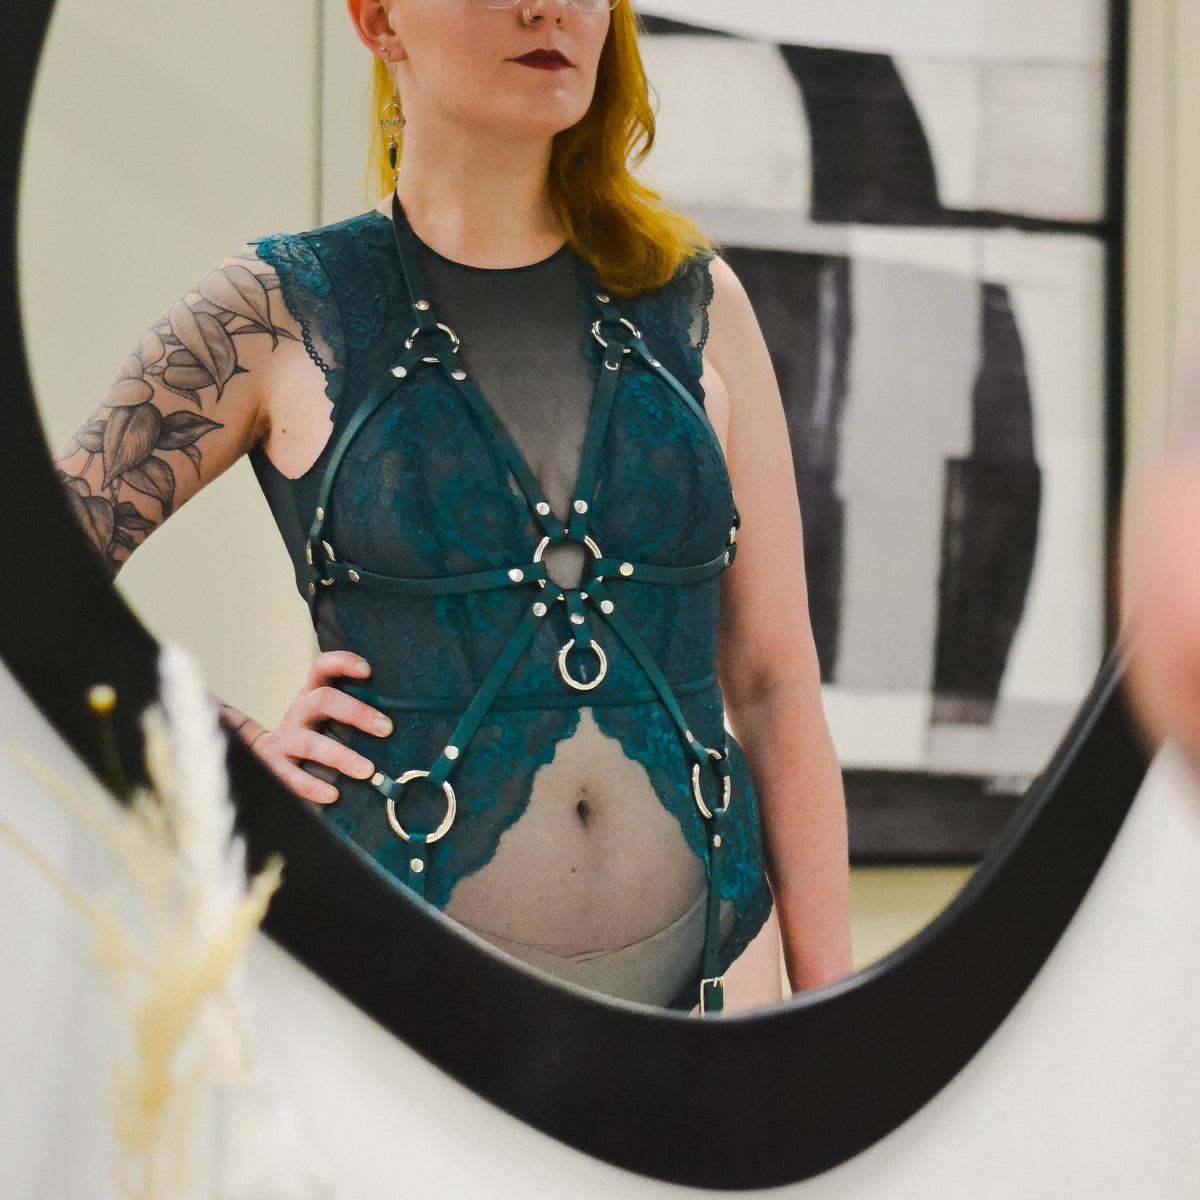 Reflection of a person in green lace with a green full body harness over the lingerie.